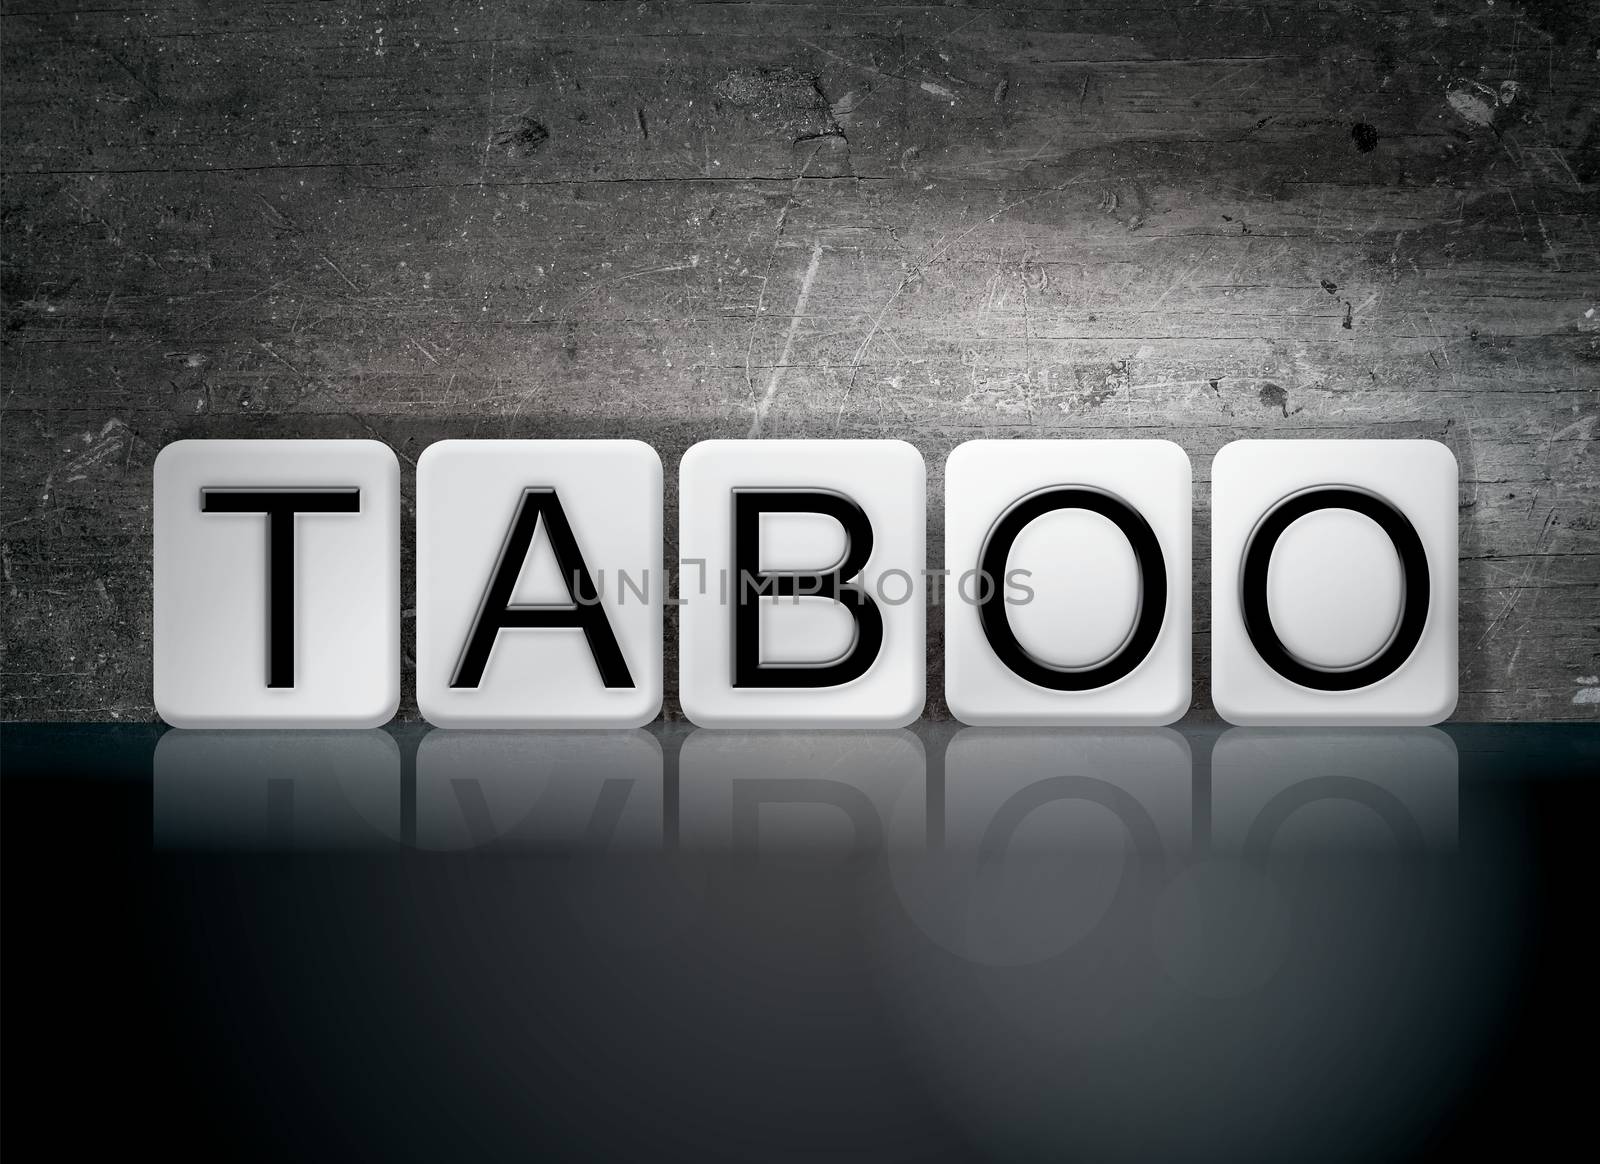 The word "Taboo" written in white tiles against a dark vintage grunge background.